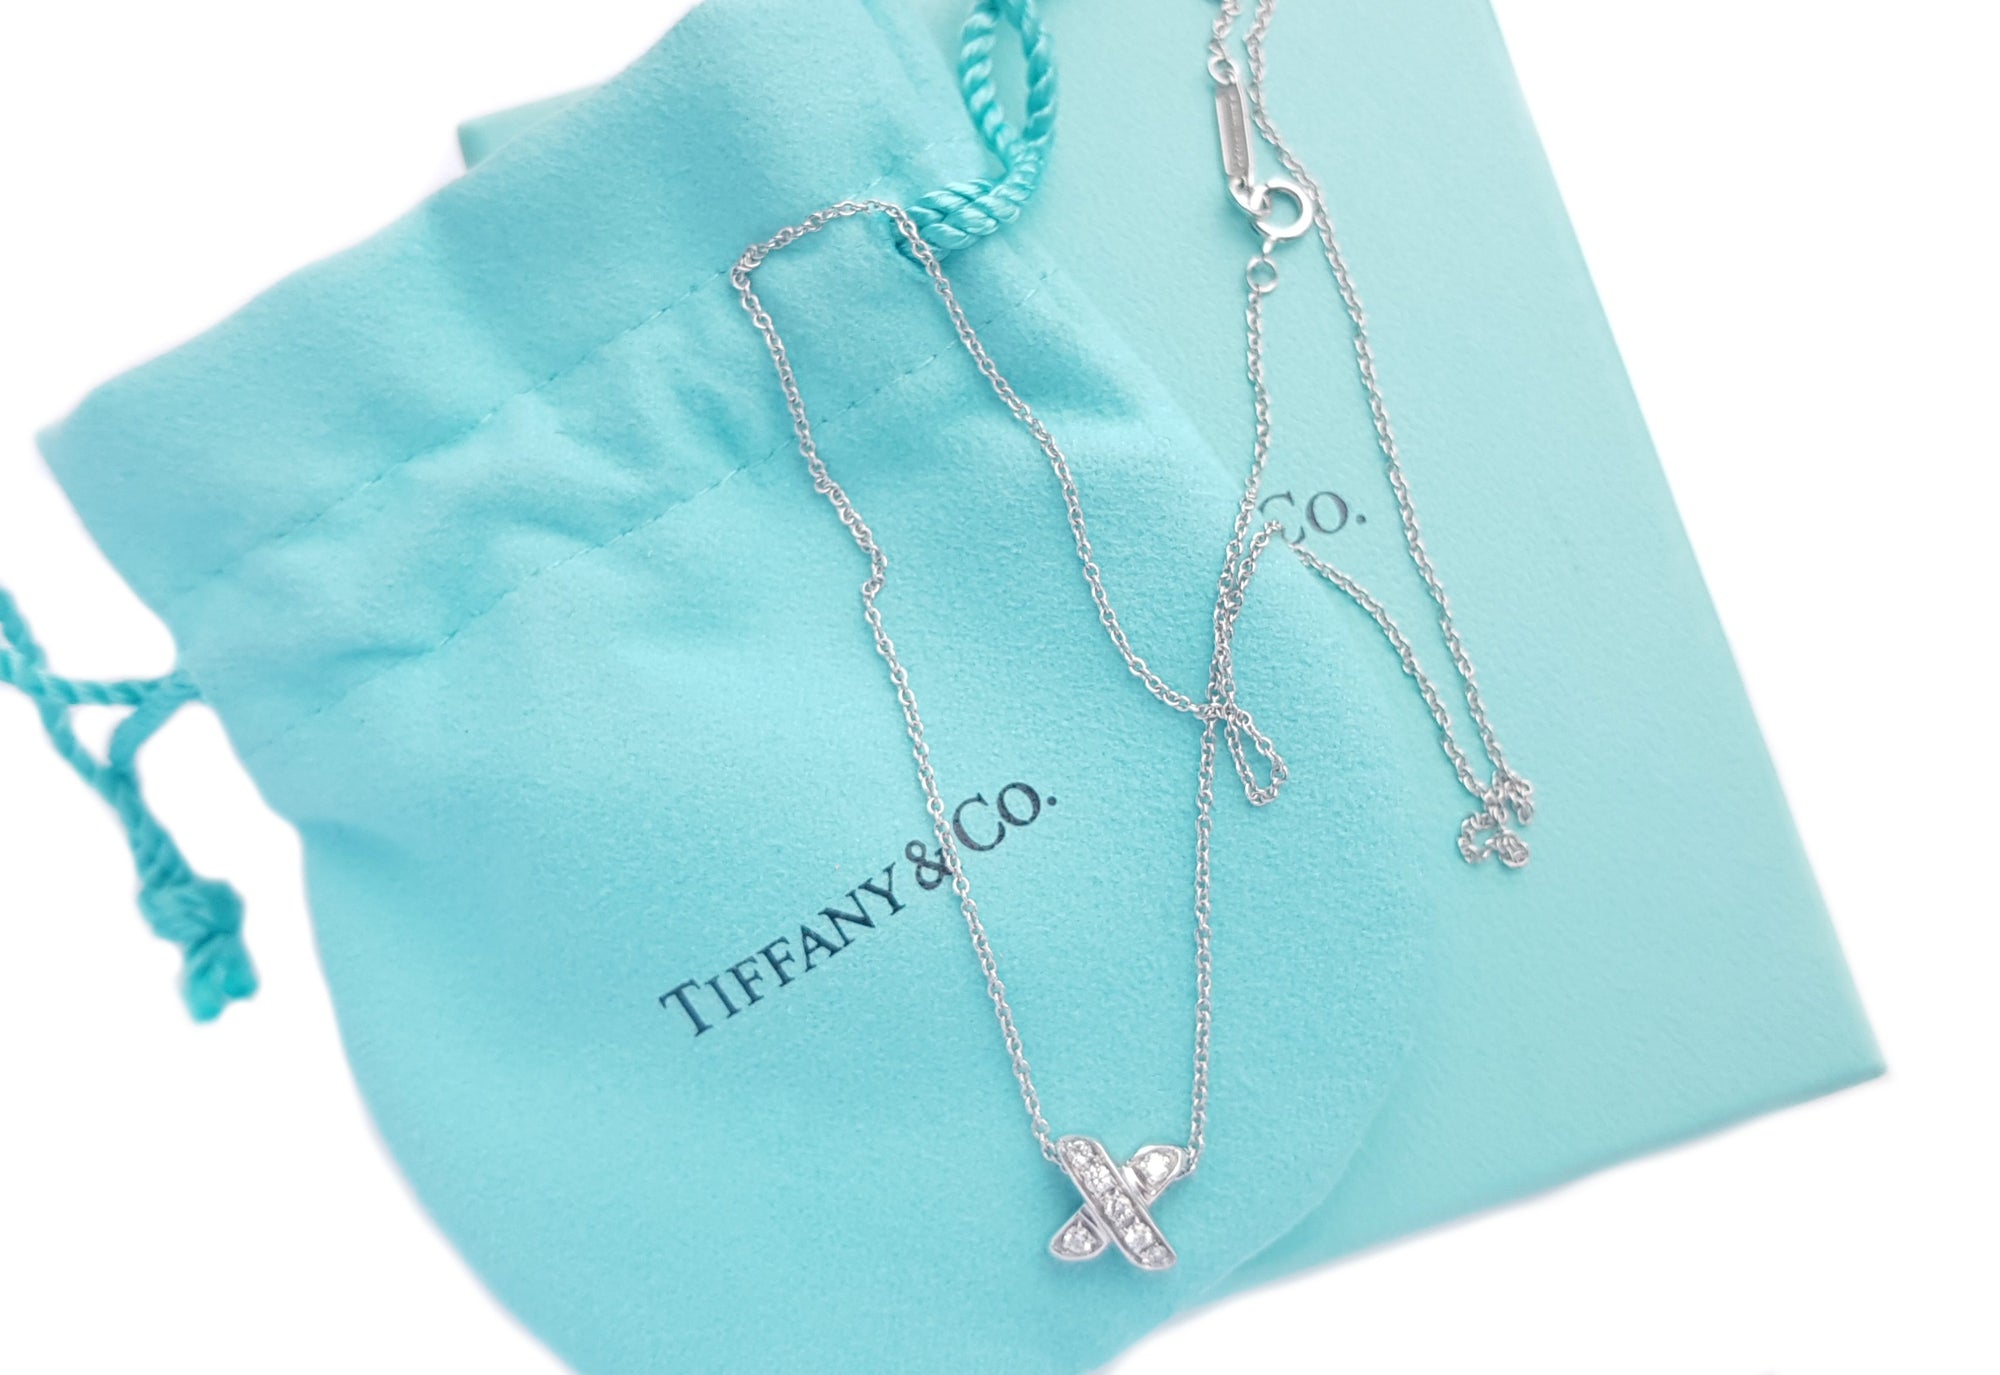 TIFFANY & CO. Signature Sterling Silver Triple X Necklace 16.25